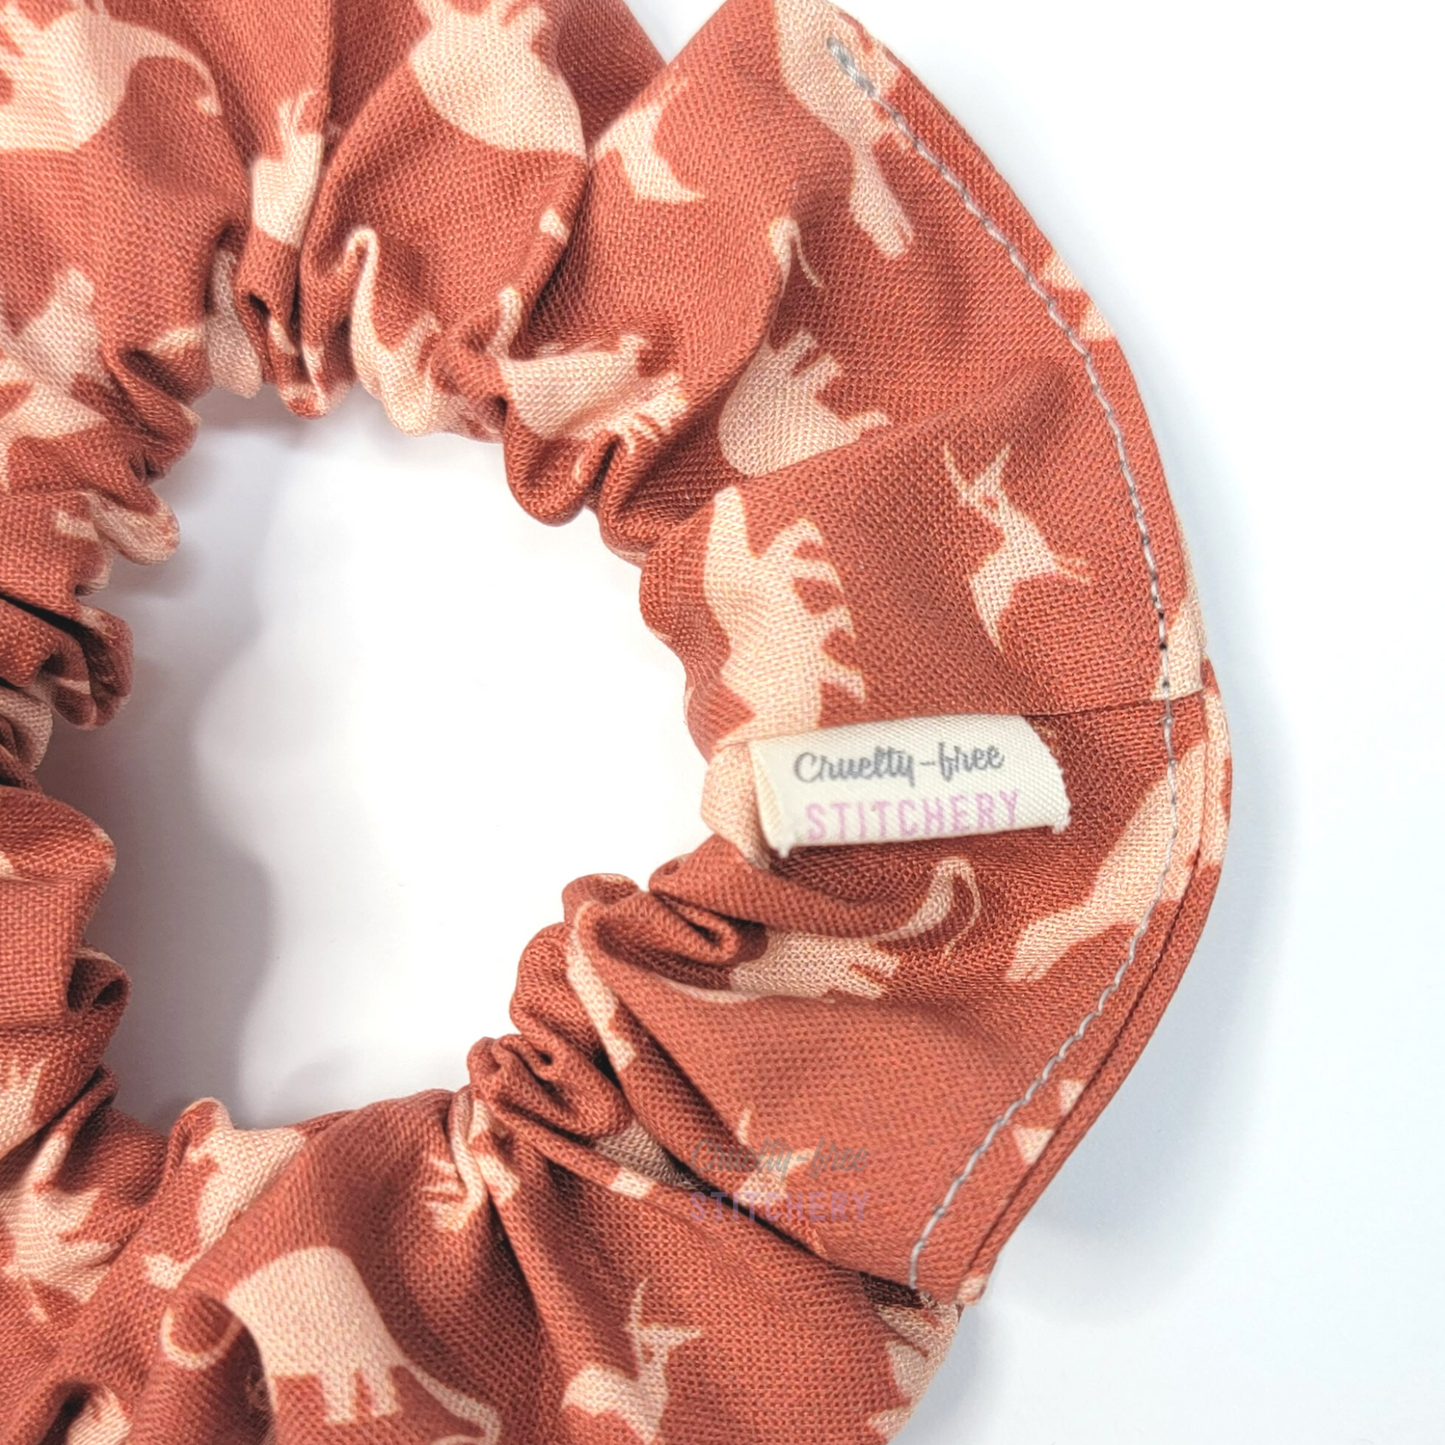 Dark orange with light orange dinosaurs print scrunchie - close-up with a small white tag with the Cruelty-Free Stitchery logo.